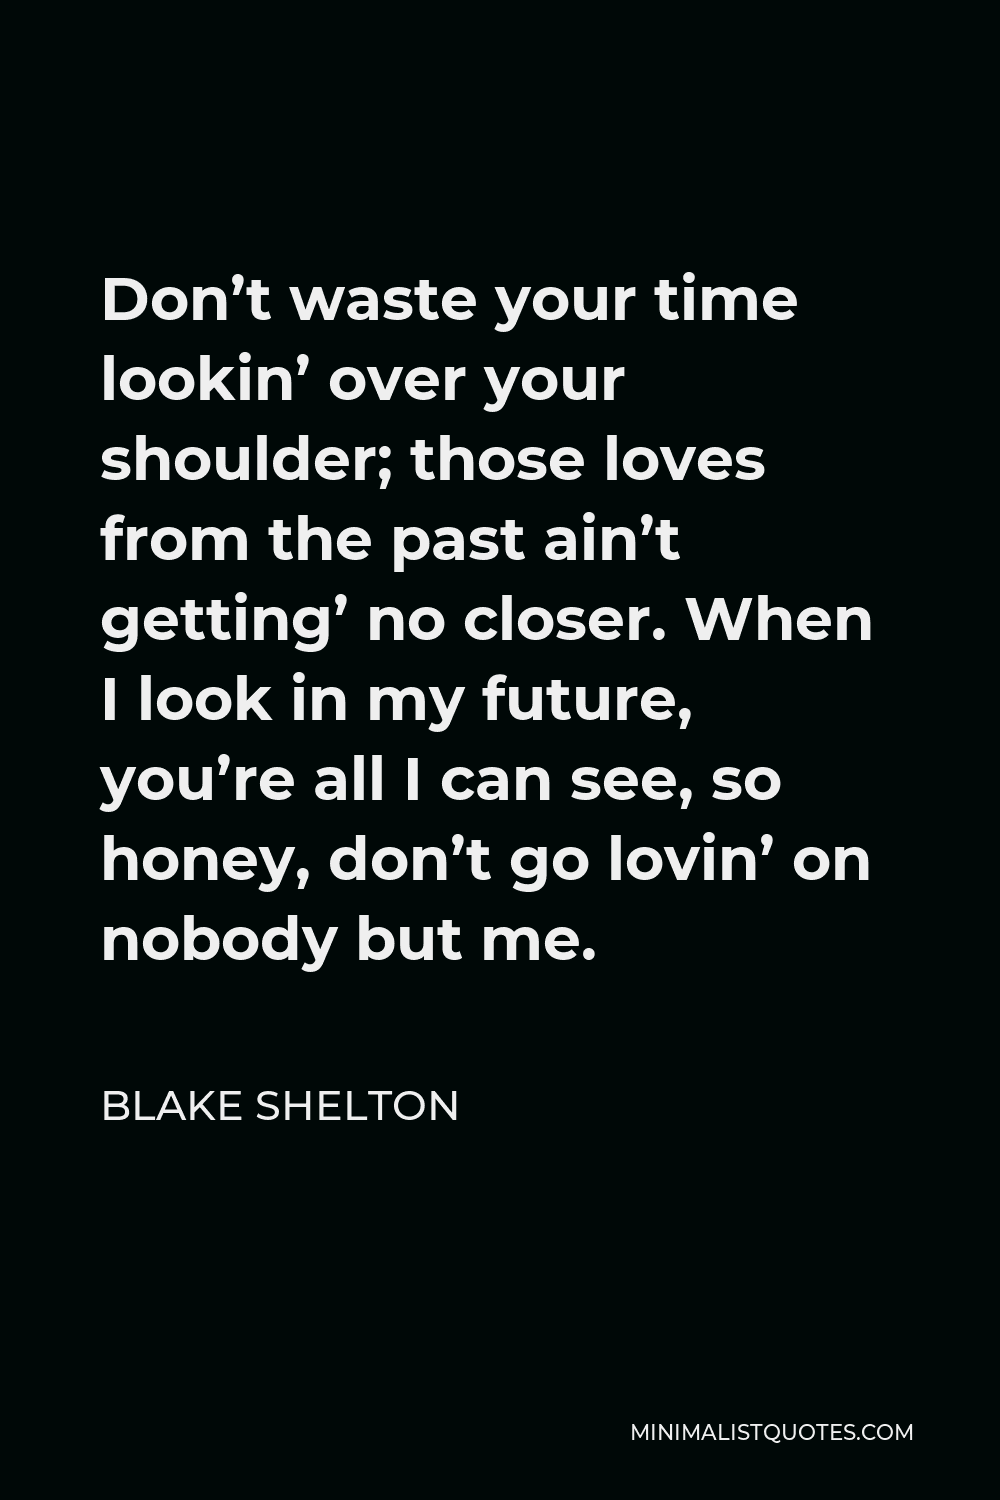 Blake Shelton Quote - Don’t waste your time lookin’ over your shoulder; those loves from the past ain’t getting’ no closer. When I look in my future, you’re all I can see, so honey, don’t go lovin’ on nobody but me.